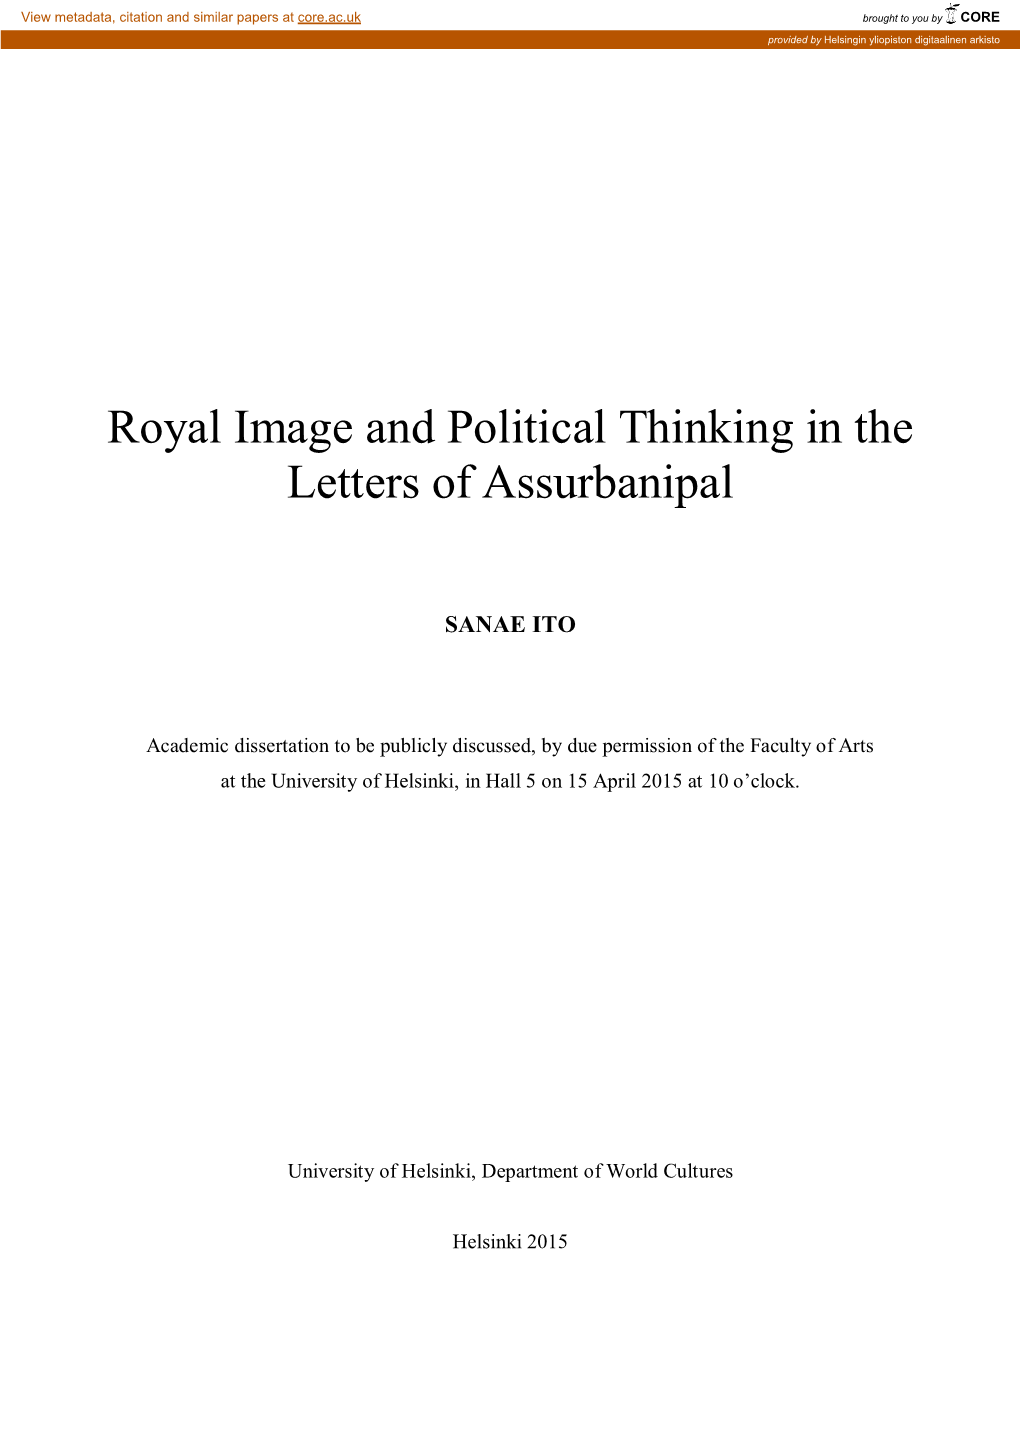 Royal Image and Political Thinking in the Letters of Assurbanipal